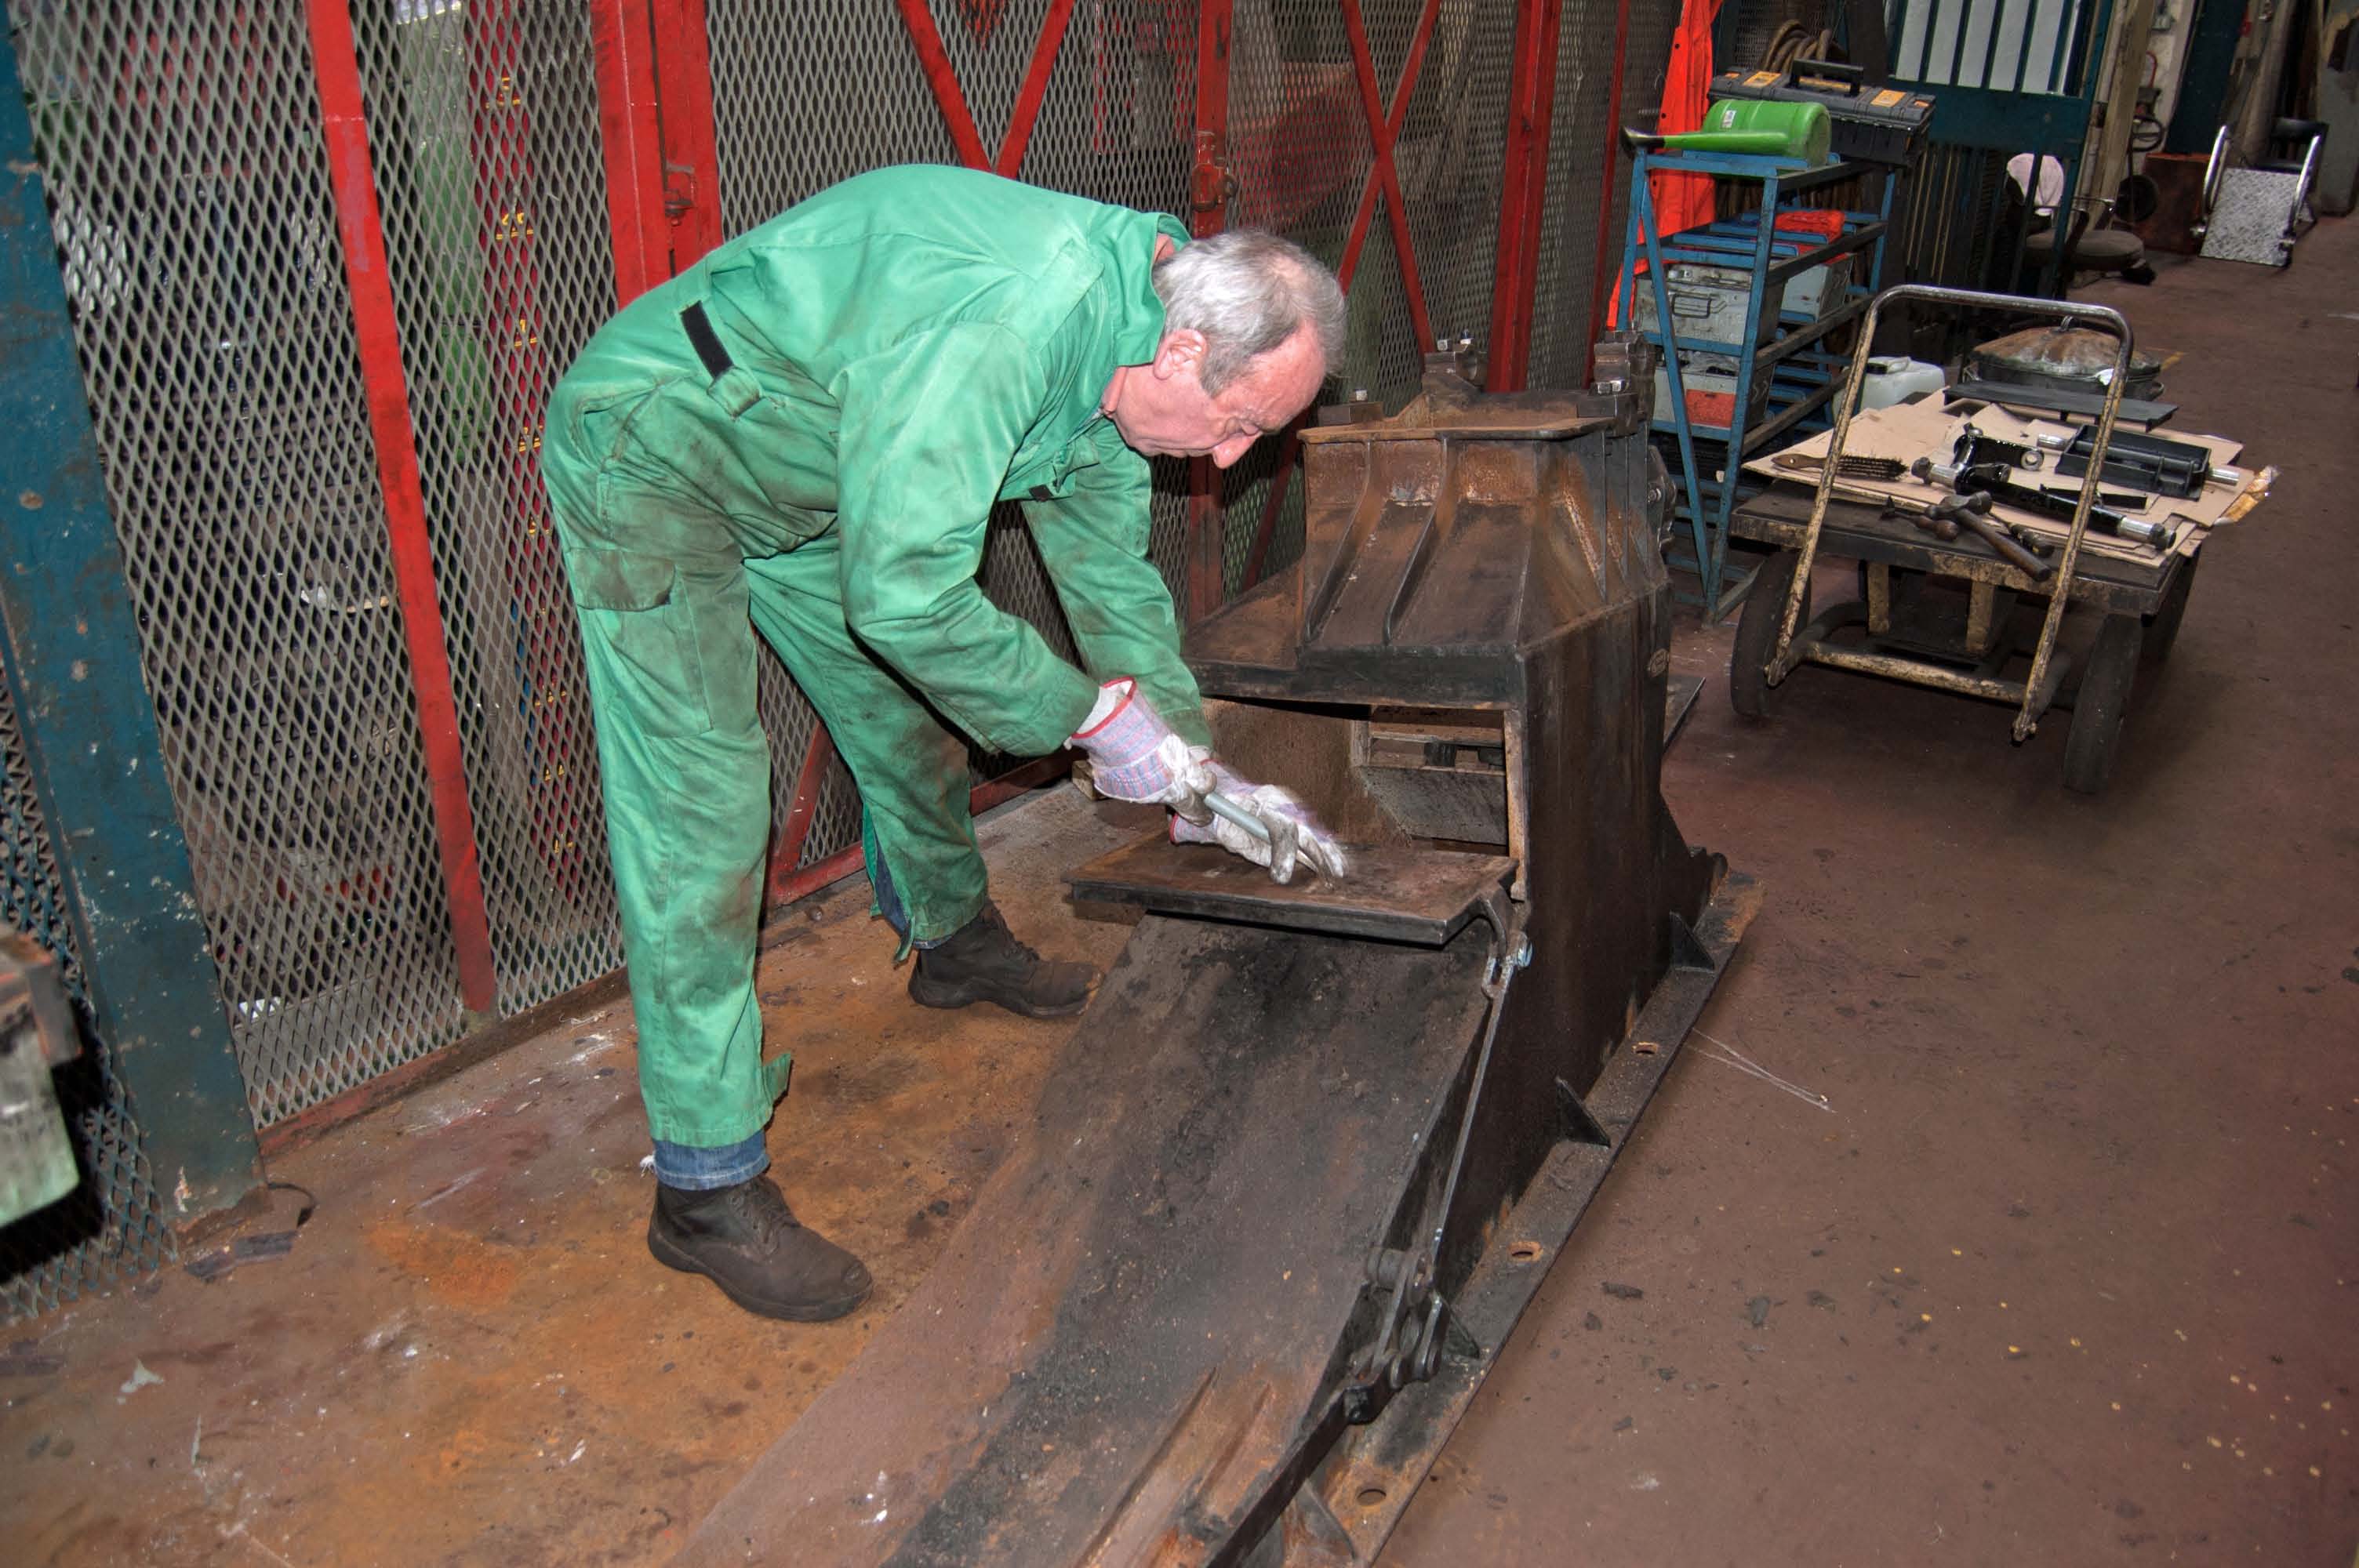 Other parts of the ashpans are being cleaned up, prior to repairs